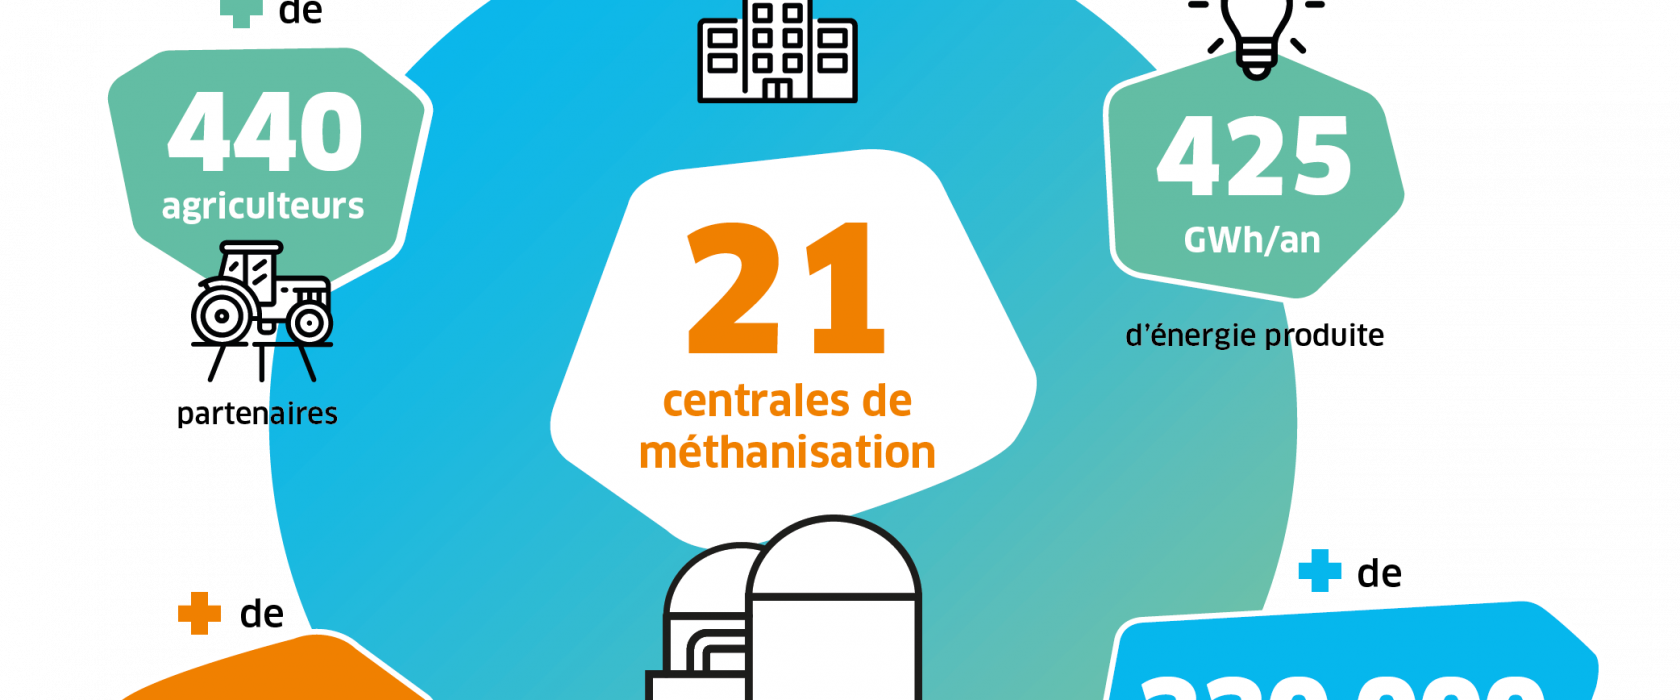 infographie chiffres cles 2021 v3 02